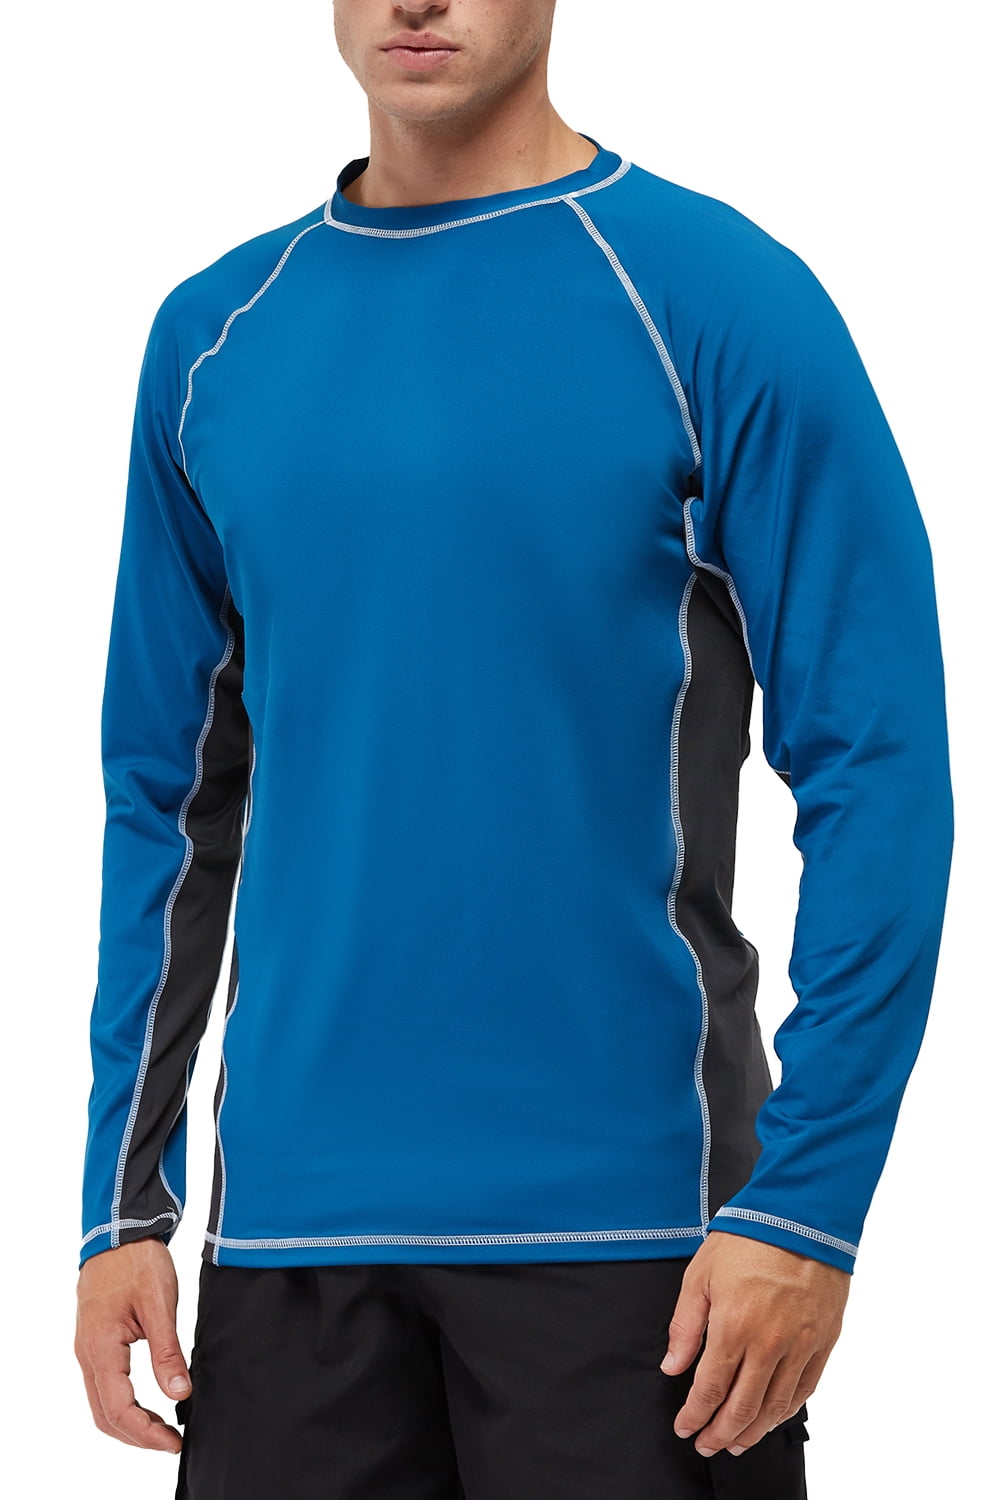 Gillz Fishing Shirt with Uv Protection for Men, Tournament Series